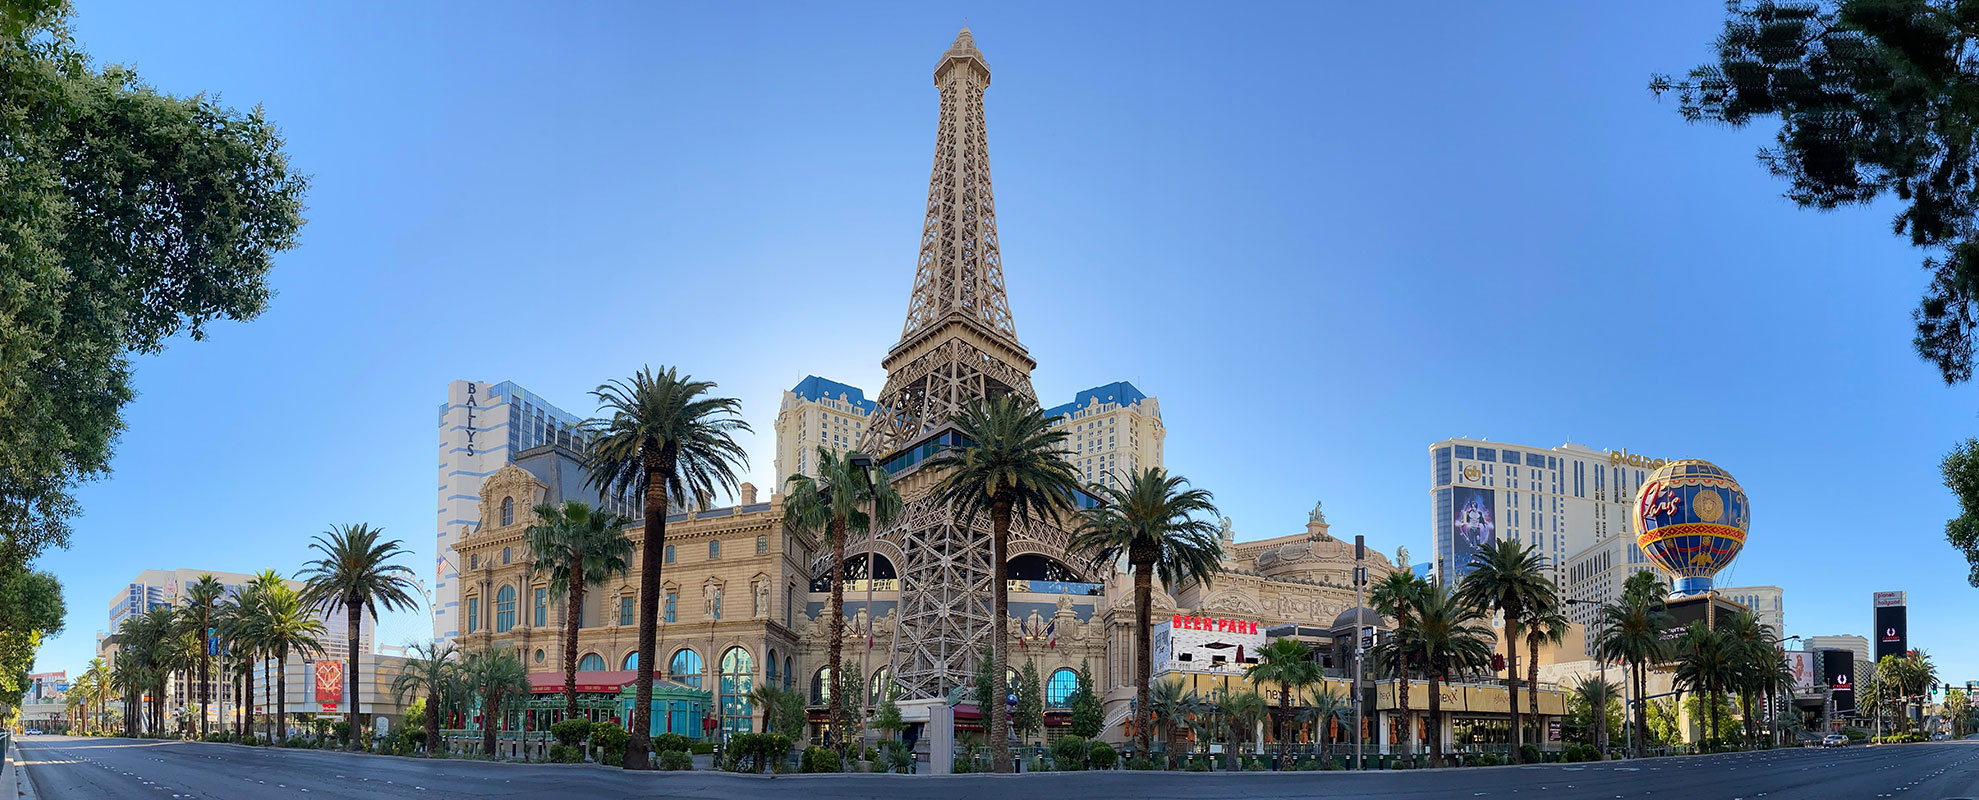 Experience LV | Las Vegas Hotels, Shows, Tours, Clubs & More